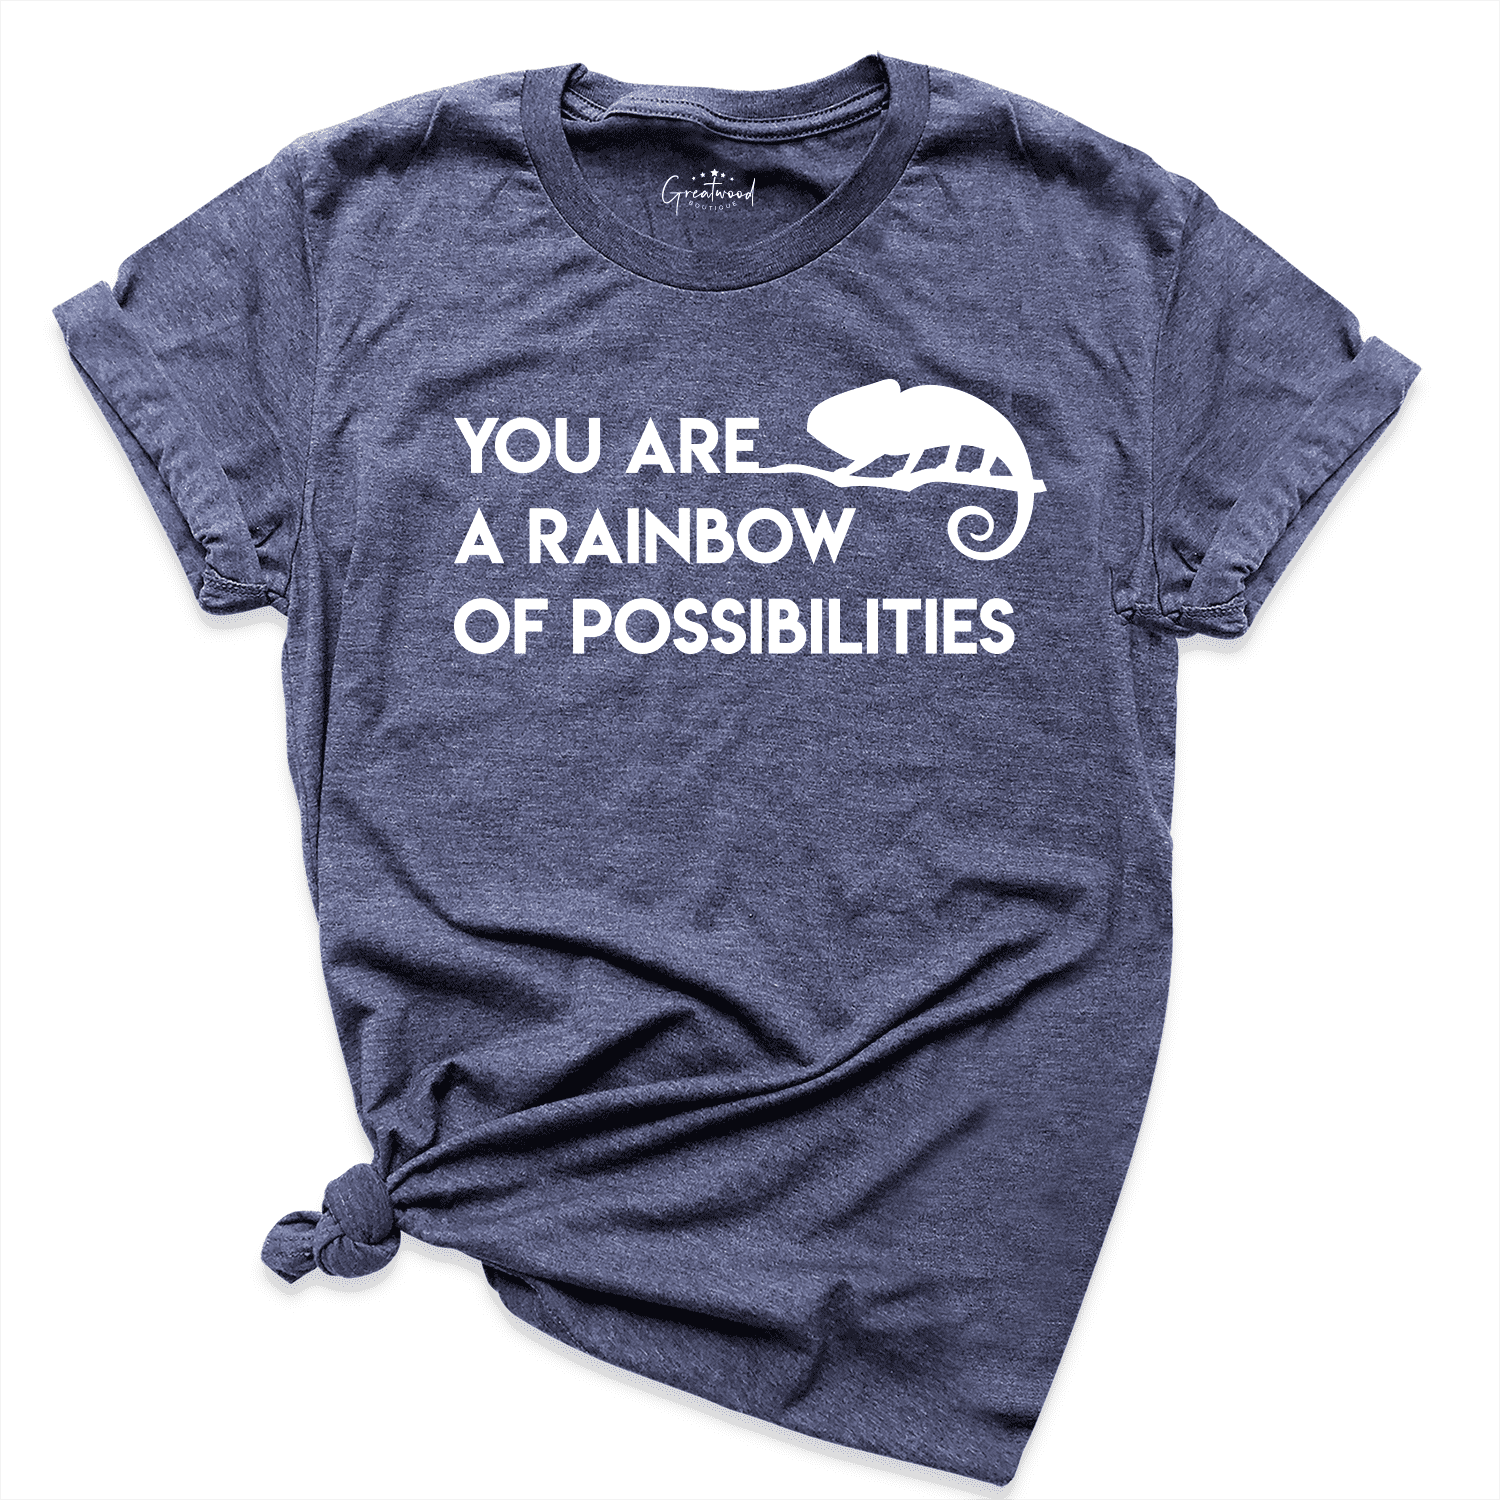 You Are a Rainbow Of Possibilities Shirt Navy - Greatwood Boutique